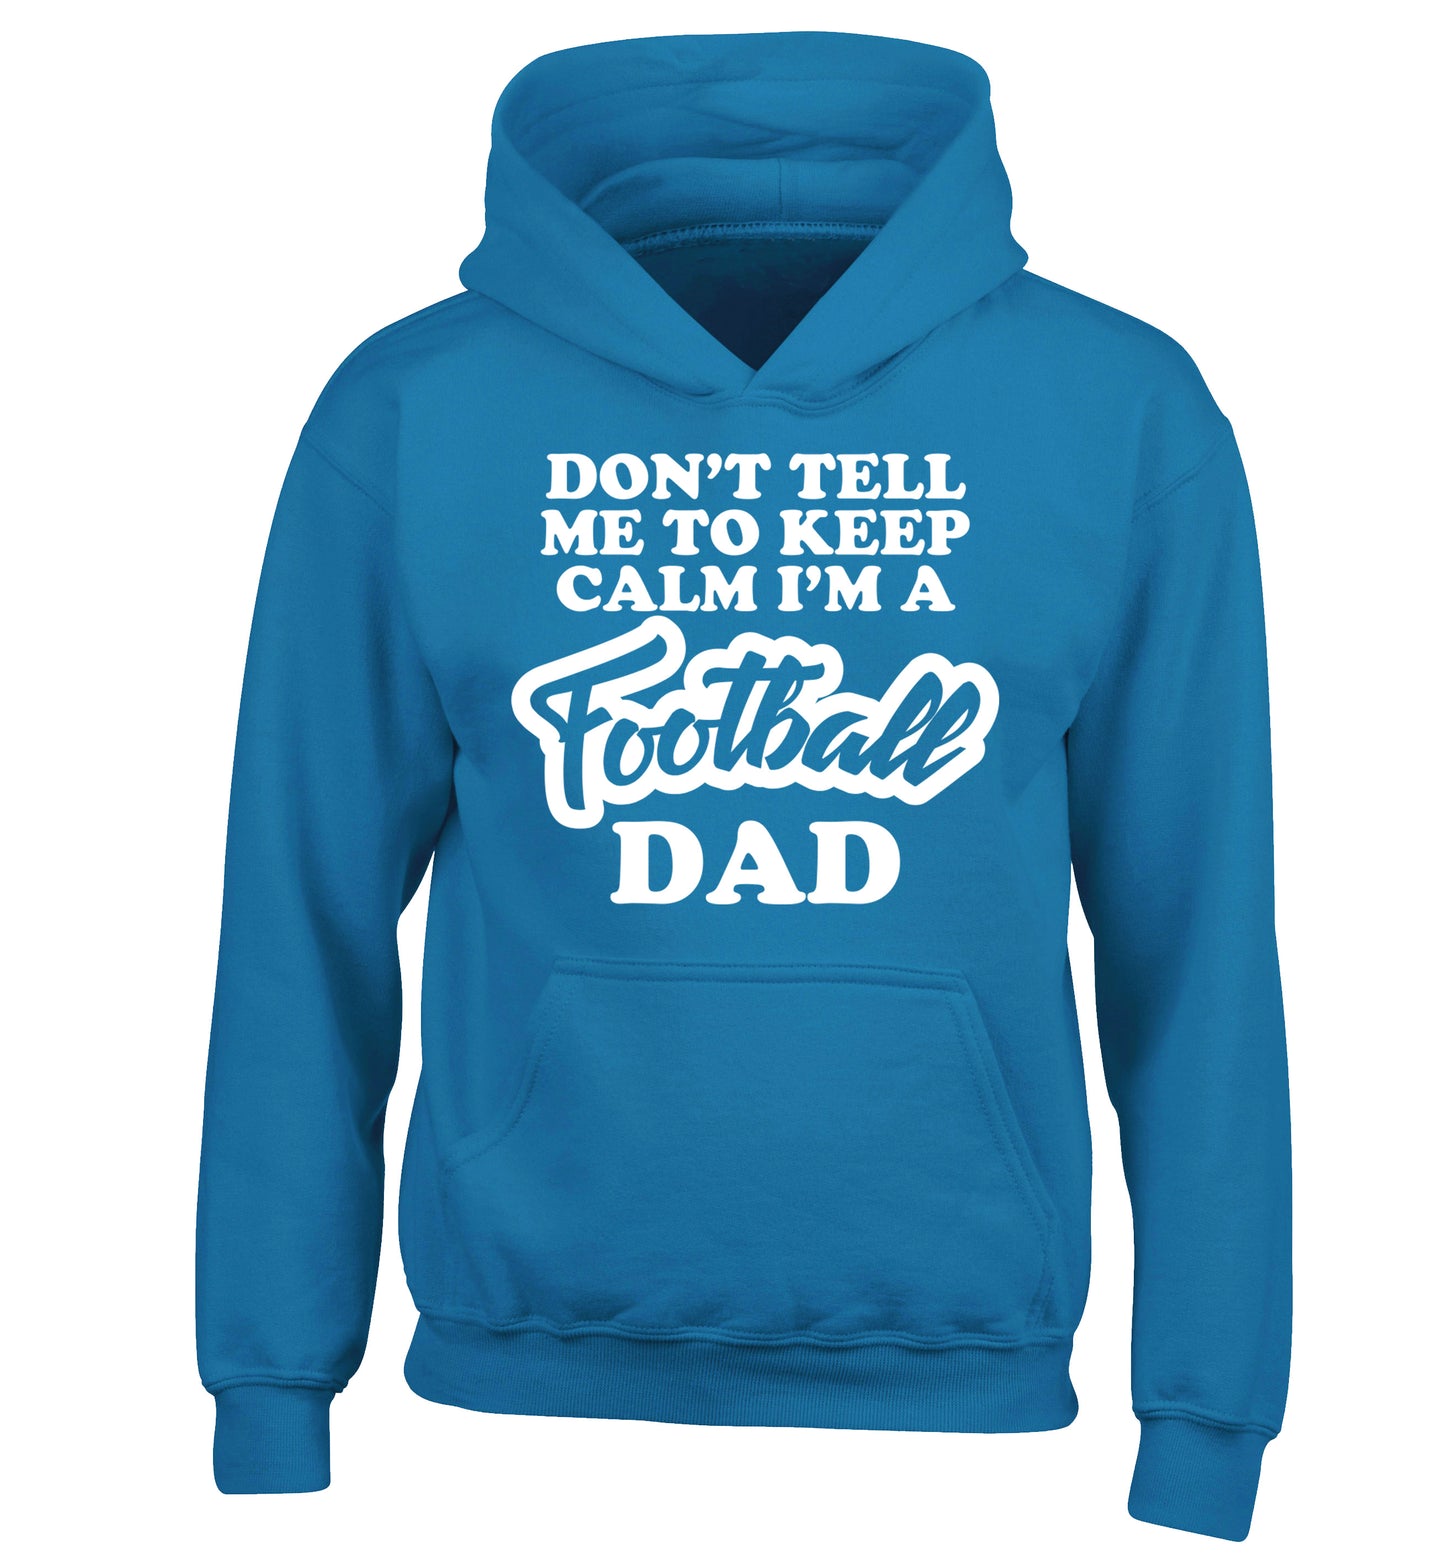 Don't tell me to keep calm I'm a football dad children's blue hoodie 12-14 Years